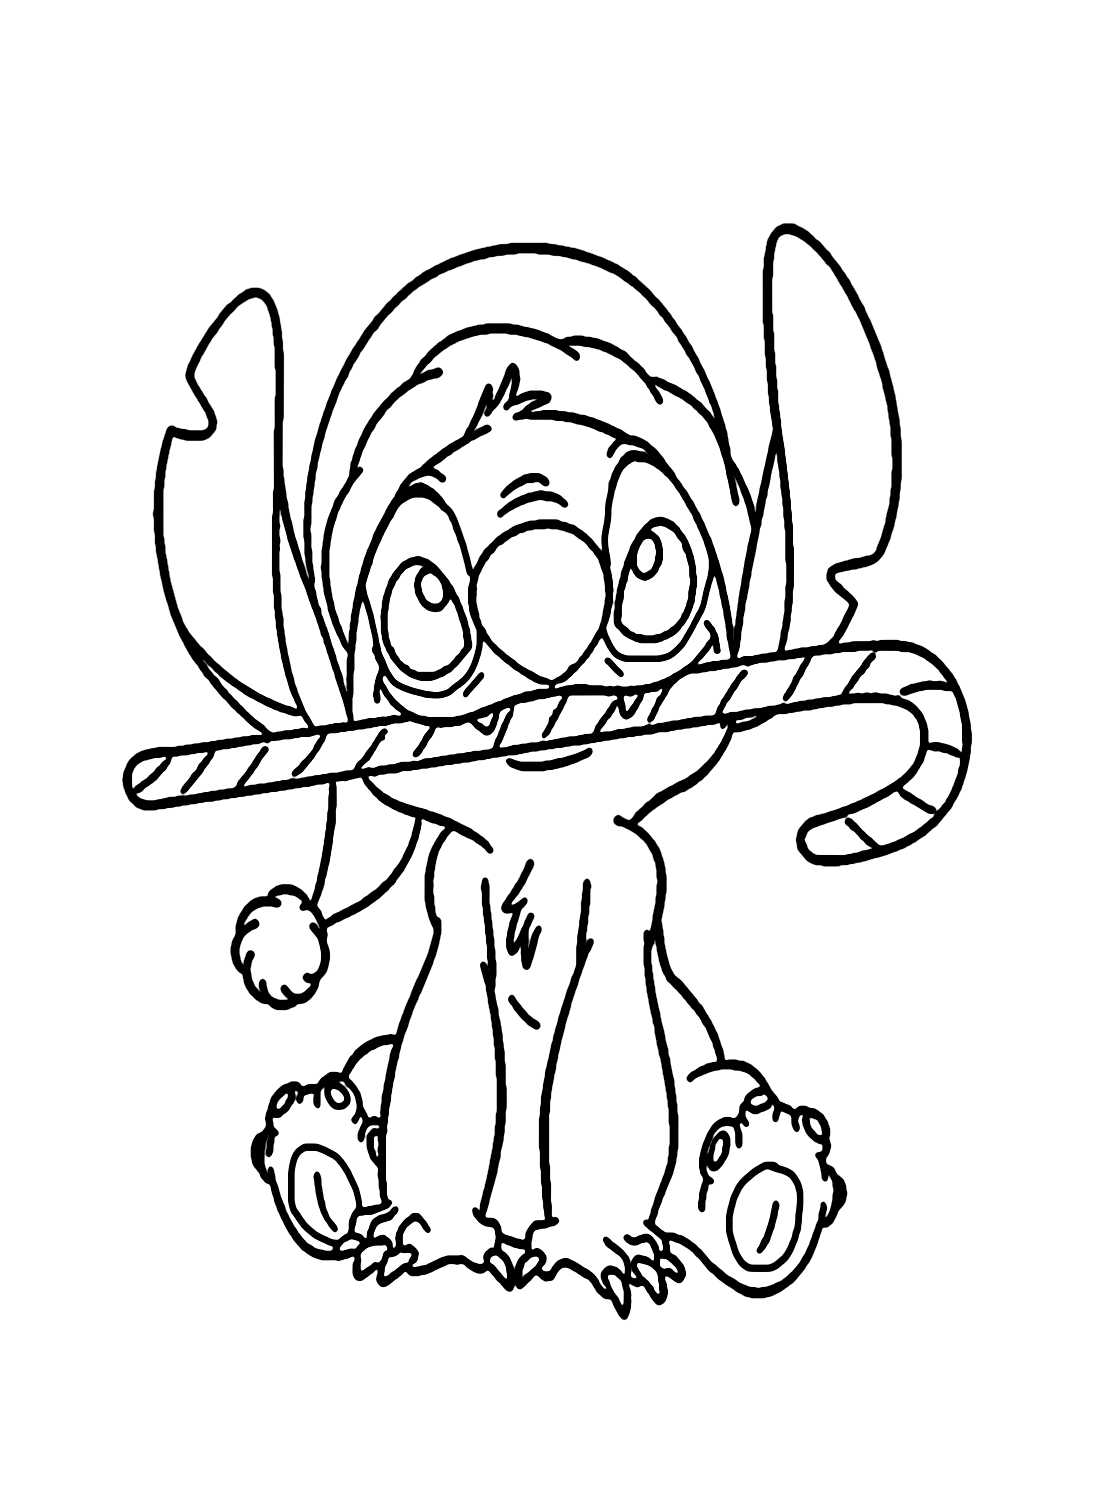 Stitch Disney Christmas Coloring Pages Coloring Page